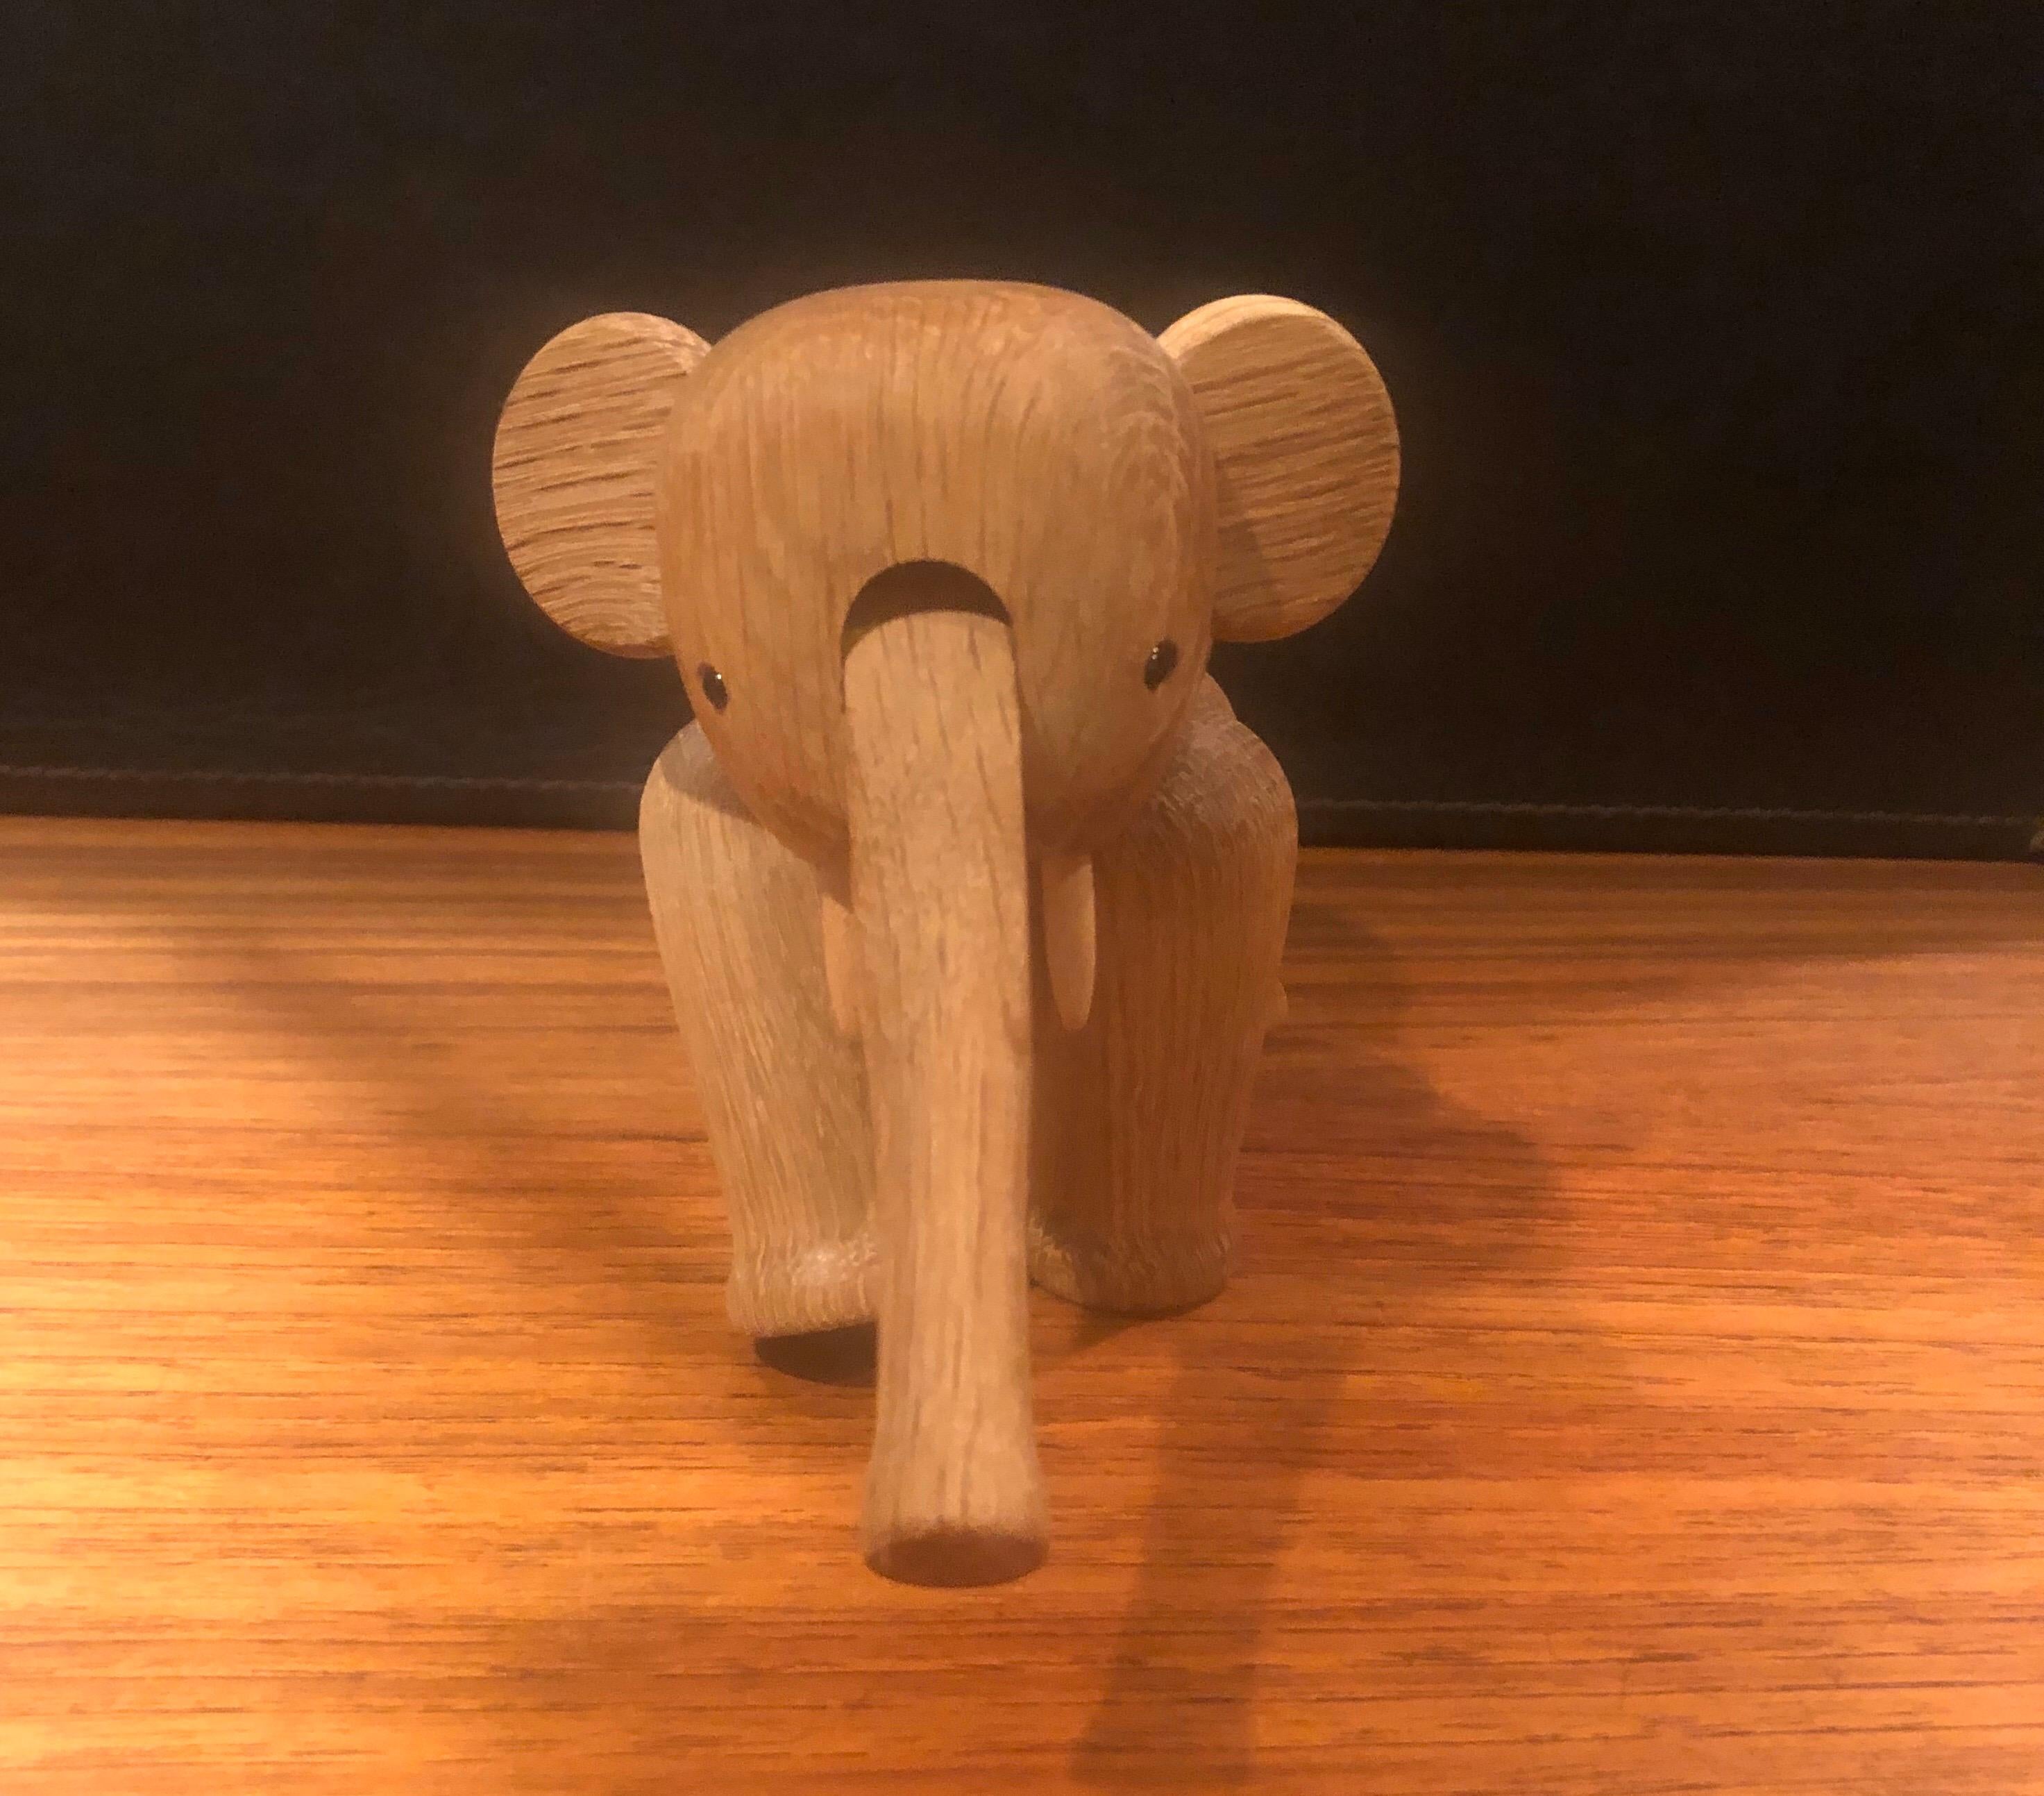 Articulated toy elephant by Kay Bojesen, circa 1990s.

Kay Bojesen's elephant, born in 1953, is a world-famous Classic for children and adults alike. With its good natured expression, the elephant is a faithful companion all the way from the play